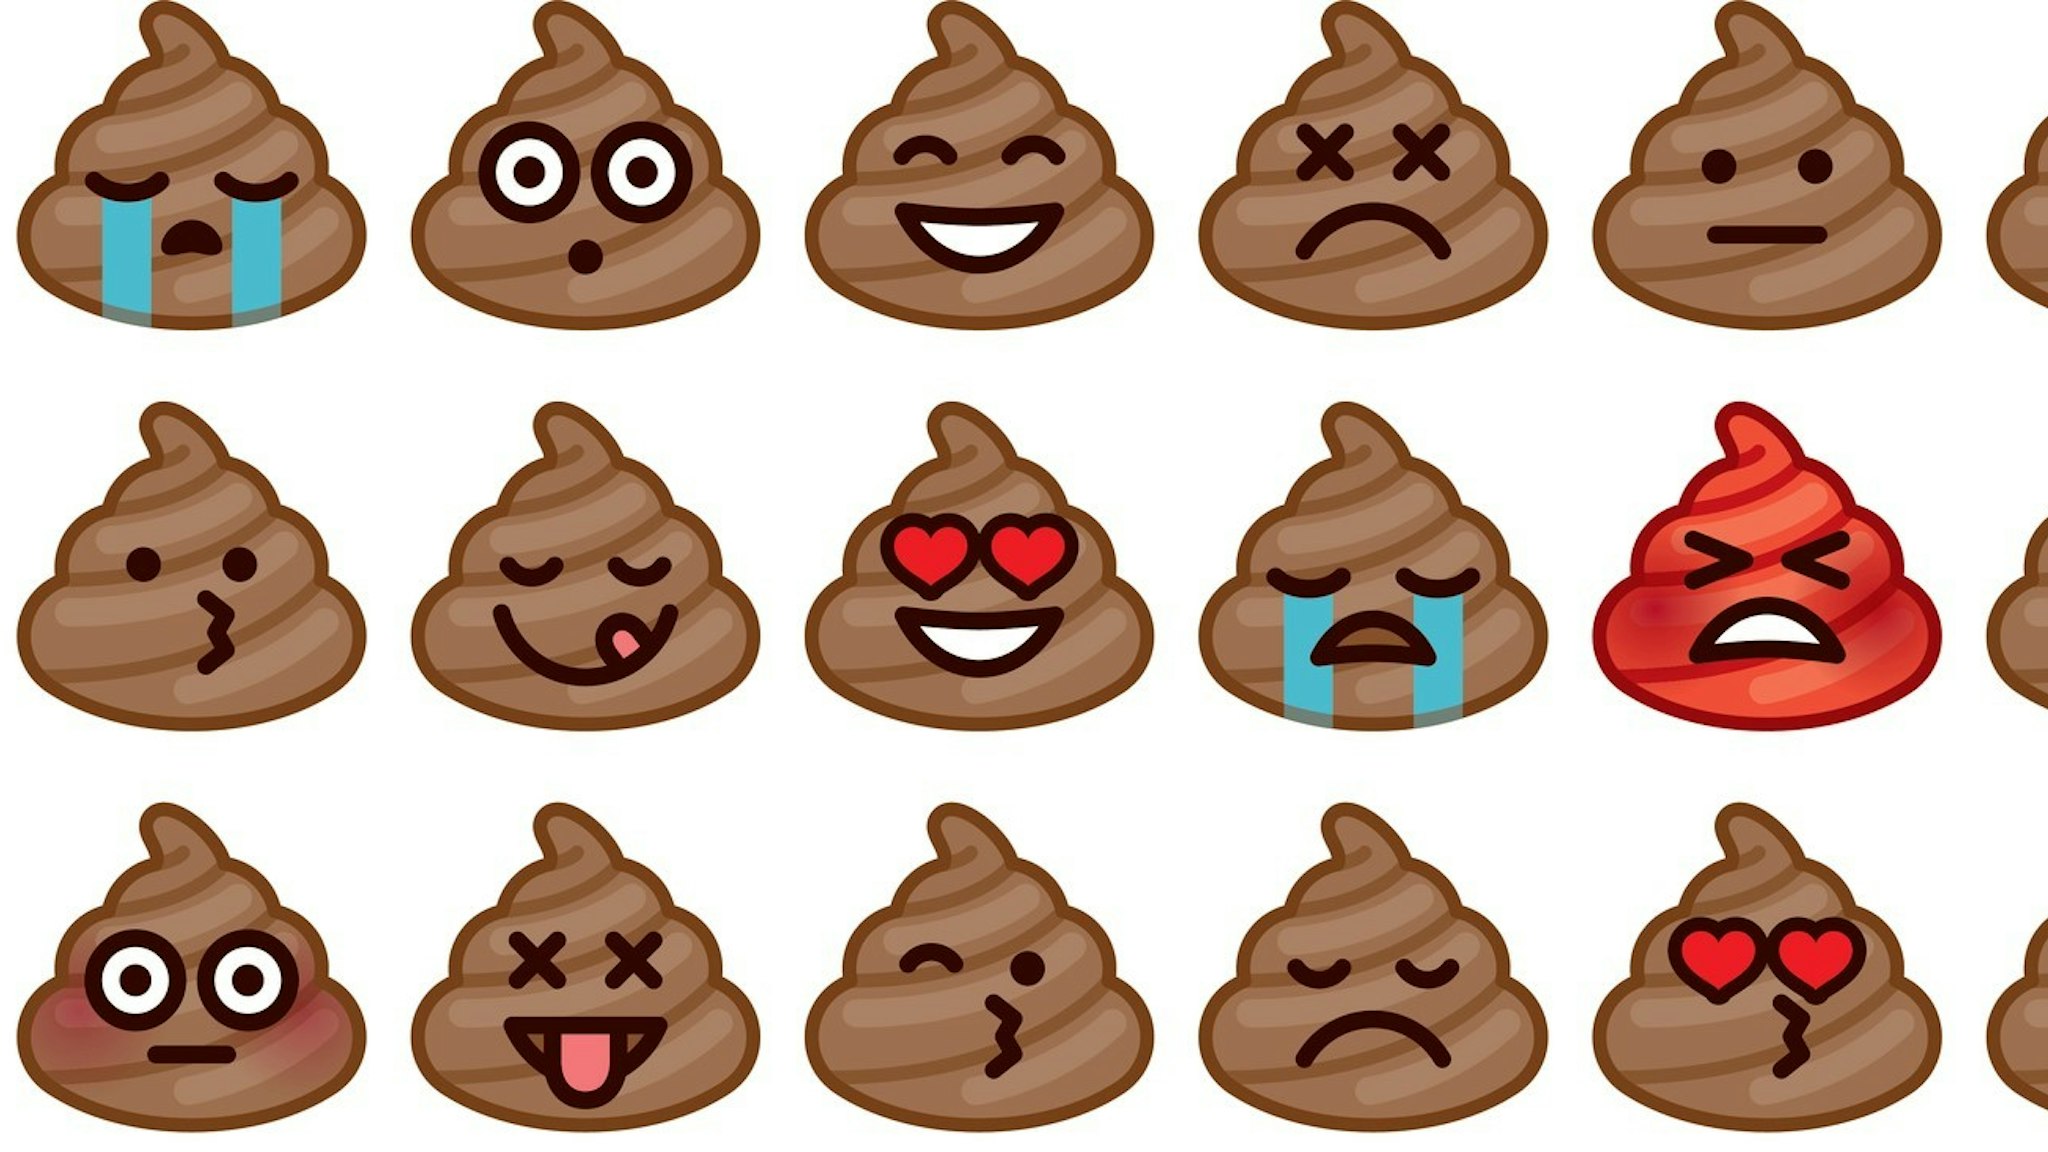 A set of 'poomojis', or emoji icons made of poo. Emotions include embarrassed, happy, in love, sad, angry, crying, and so forth. AI10 EPS file built in CMYK. Some simple transparency effects used to create the blushing effects.